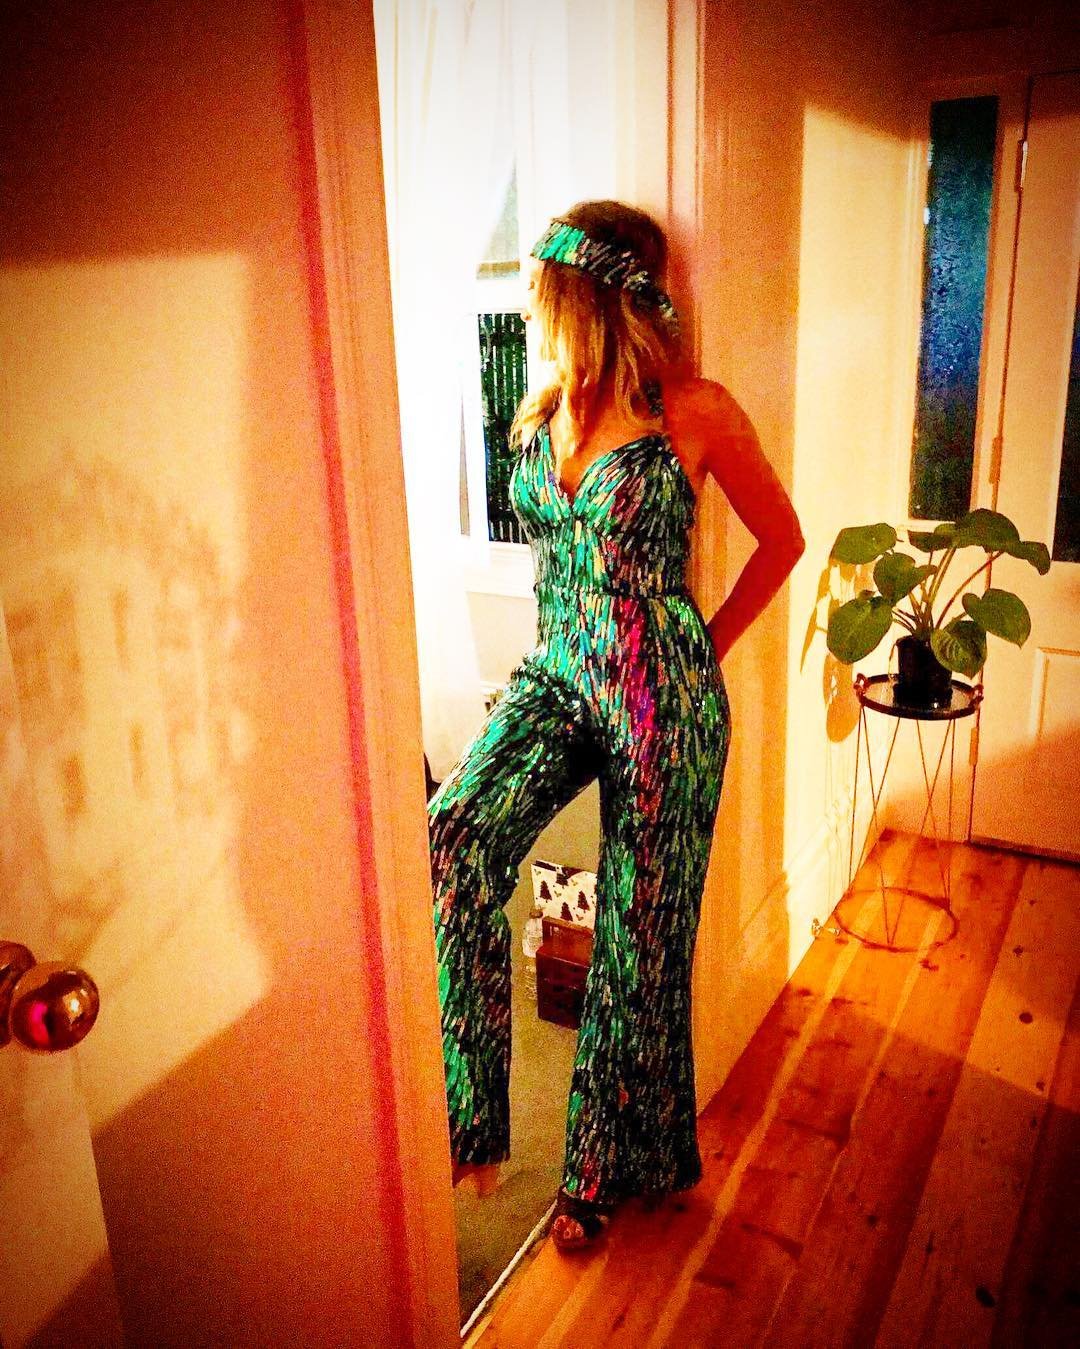 Flashback Thursday Gorgeous Girl @leahpooley in @imaginarium_costumes disco jumpsuit. 😍✨🙌
.
.
#disco #jumpsuit #catsuit #sequin #sequins #costume #partyoutfit #custommade #oneoff #unique #customdesign #costumes #sequinjumpsuit #beauty #glamour #spa